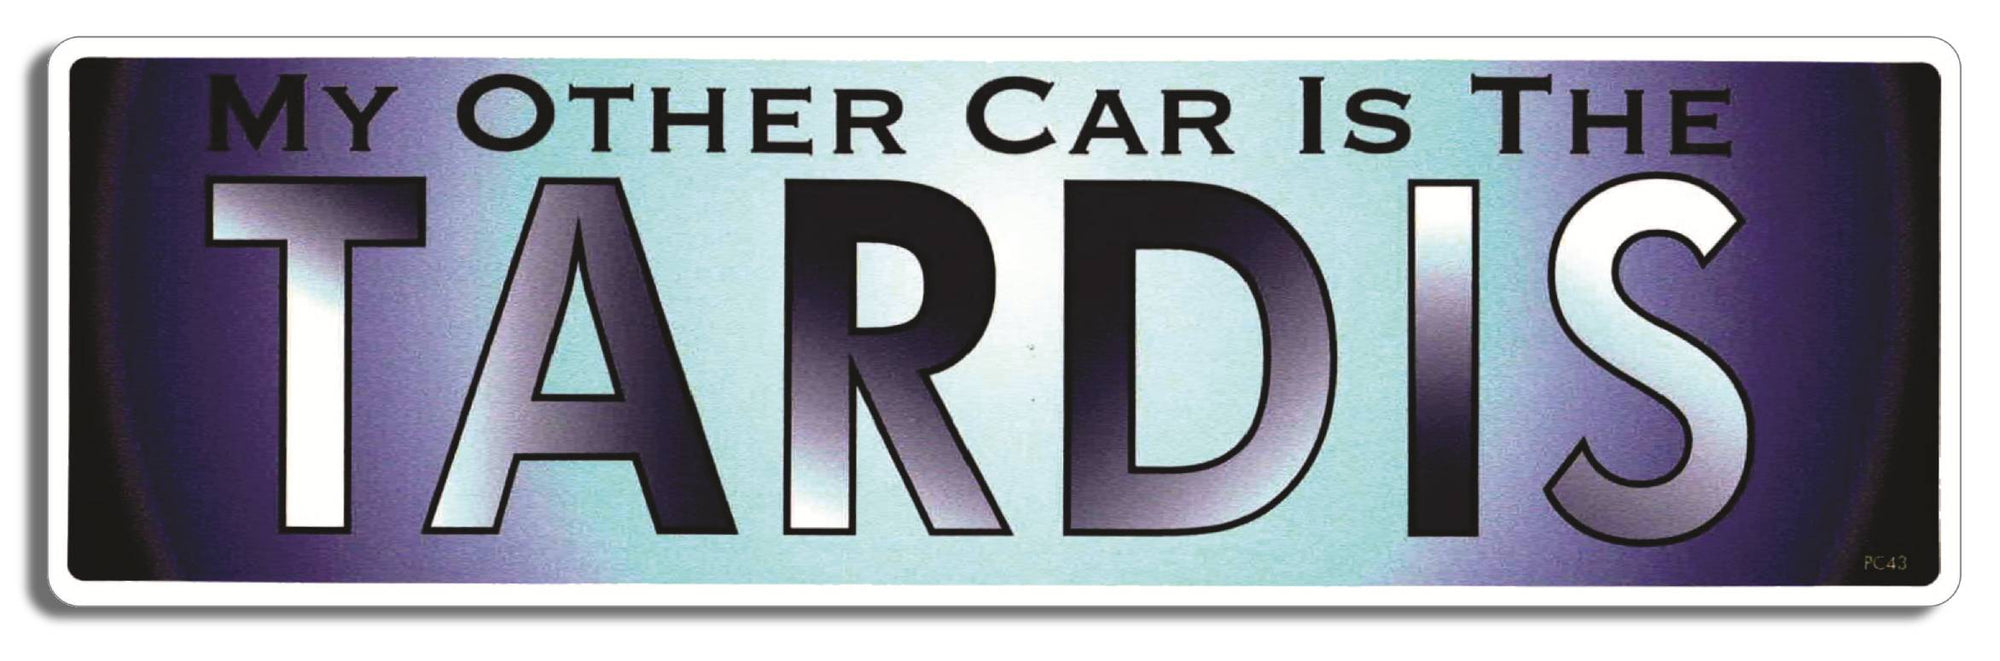 My other car is the Tardis (Dr. Who) - 3" x 10" Bumper Sticker--Car Magnet- -  Decal Bumper Sticker-dr who Bumper Sticker Car Magnet My other car is the Tardis-  Decal for carsdr who